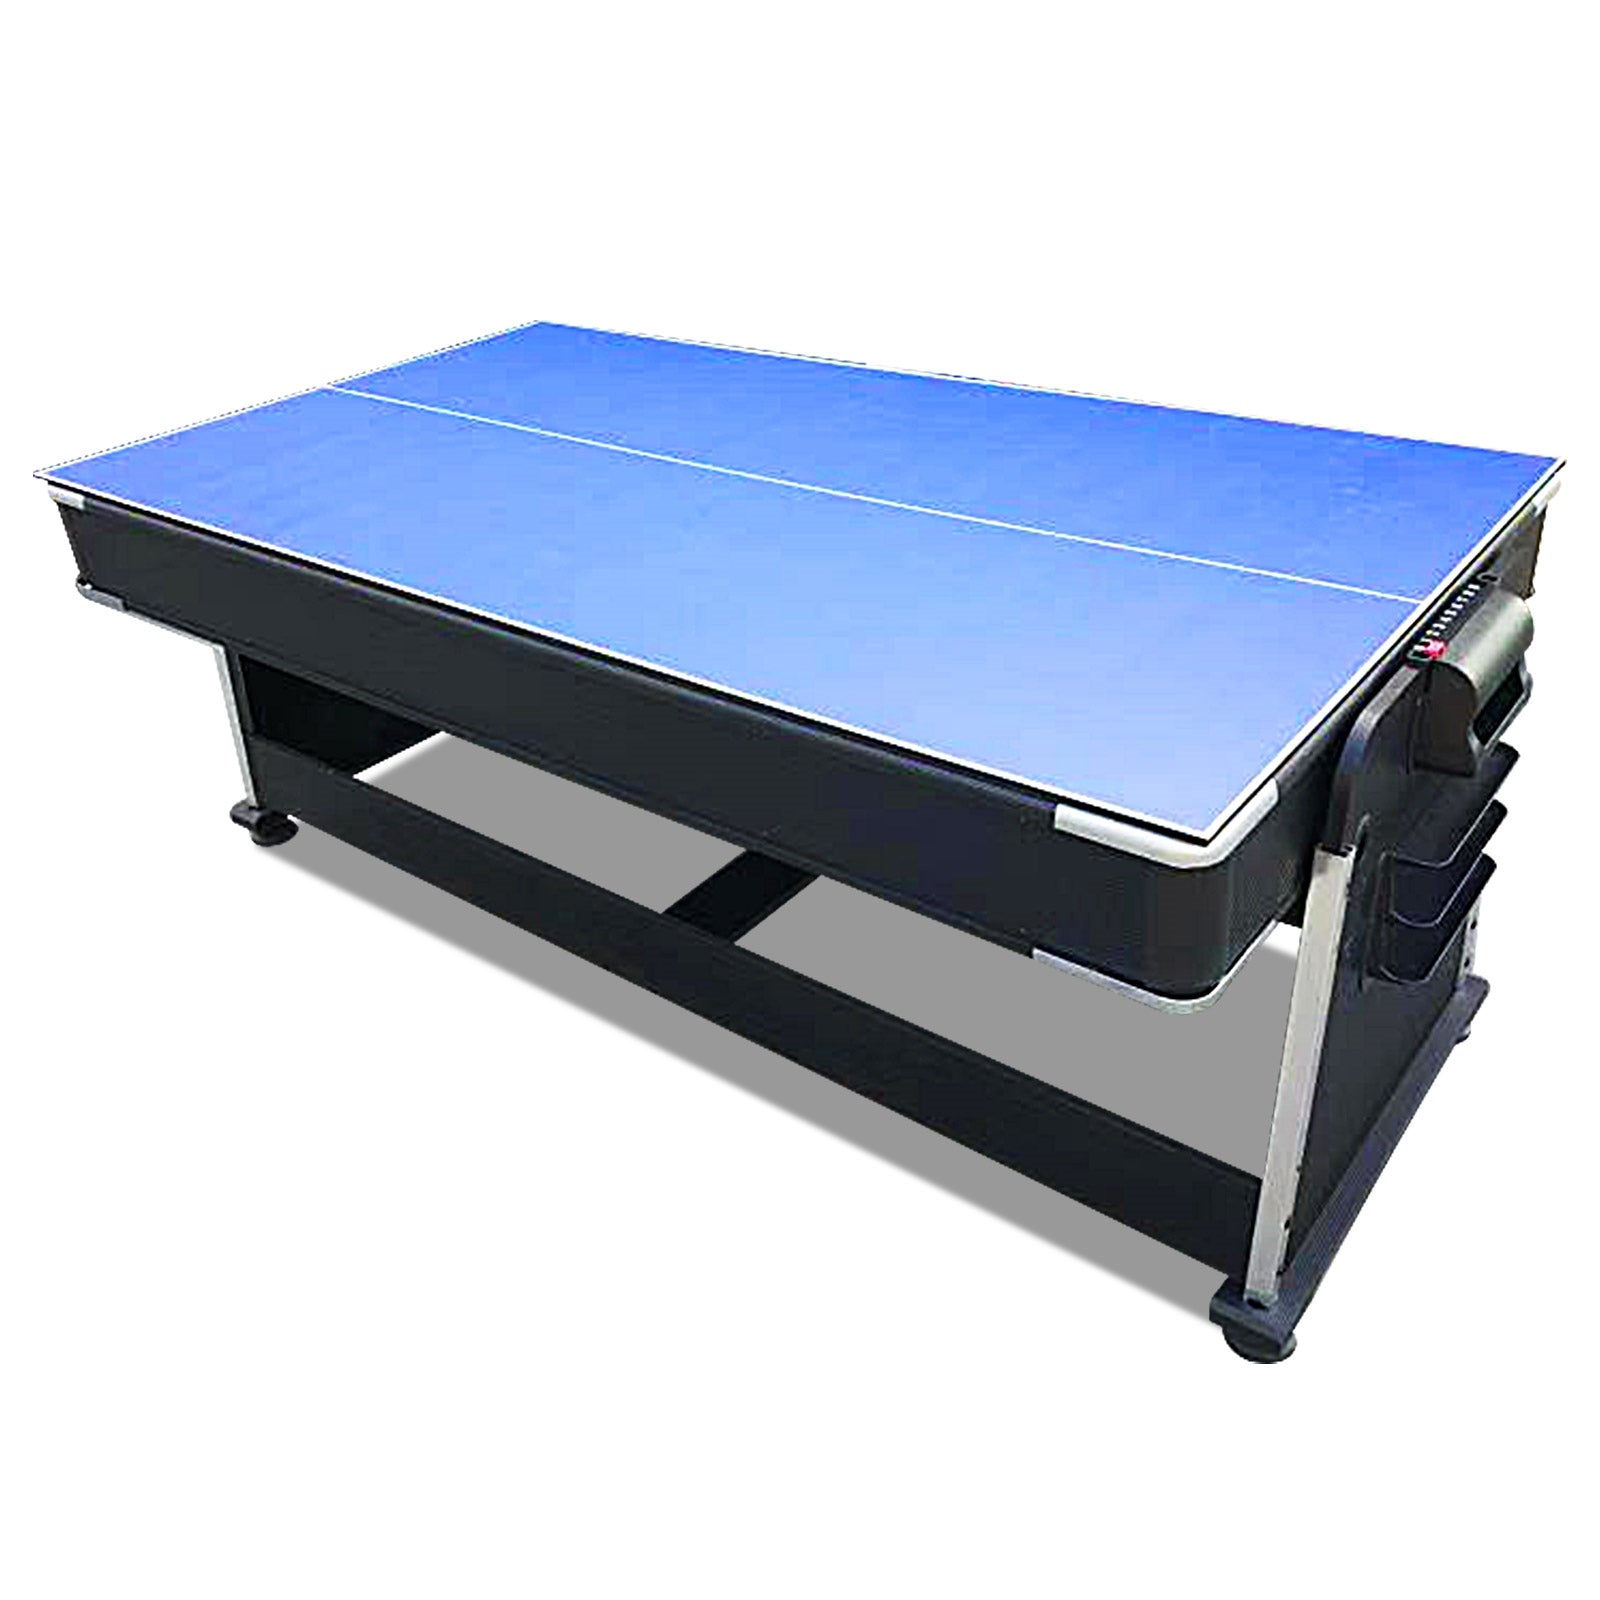 7Ft 4-In-1 Convertible Air Hockey / Pool Billiards /Dining table /Table Tennis Table Black Felt For Billiard Gaming Room Free Accessory